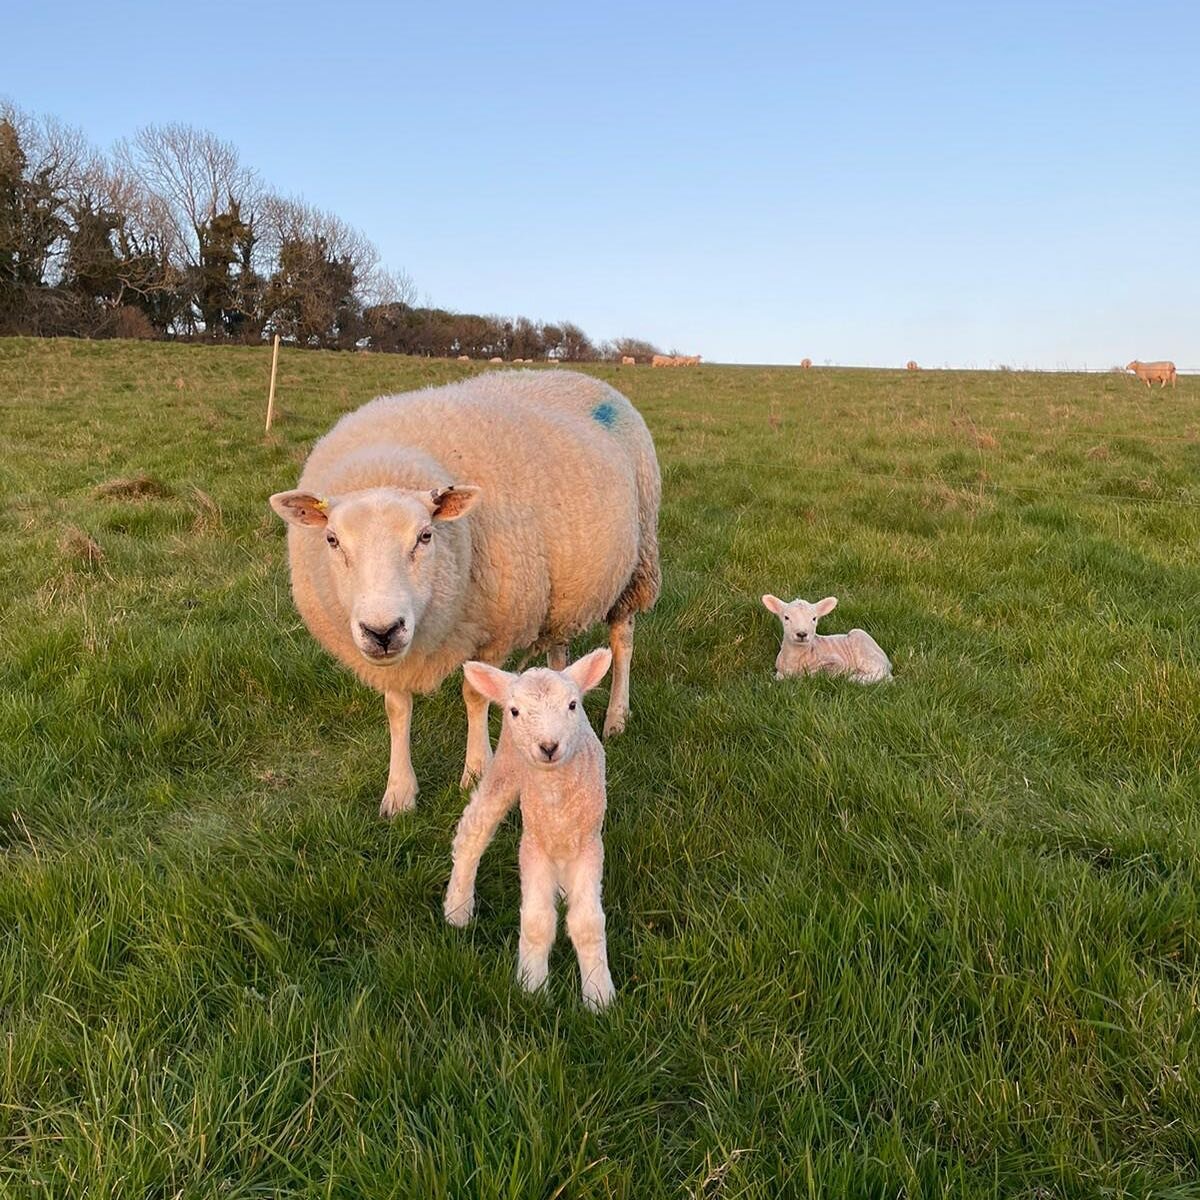 And we&rsquo;re off! Lambing 2022 has started 🐑💚☀️ come and visit them, we are open next weekend www.camillaandroly.co.uk/open-days

#camillaandroly #saddlescombefarm #lambing #lambing2022 #lambingopendays #familyfarm #farmingwithnature